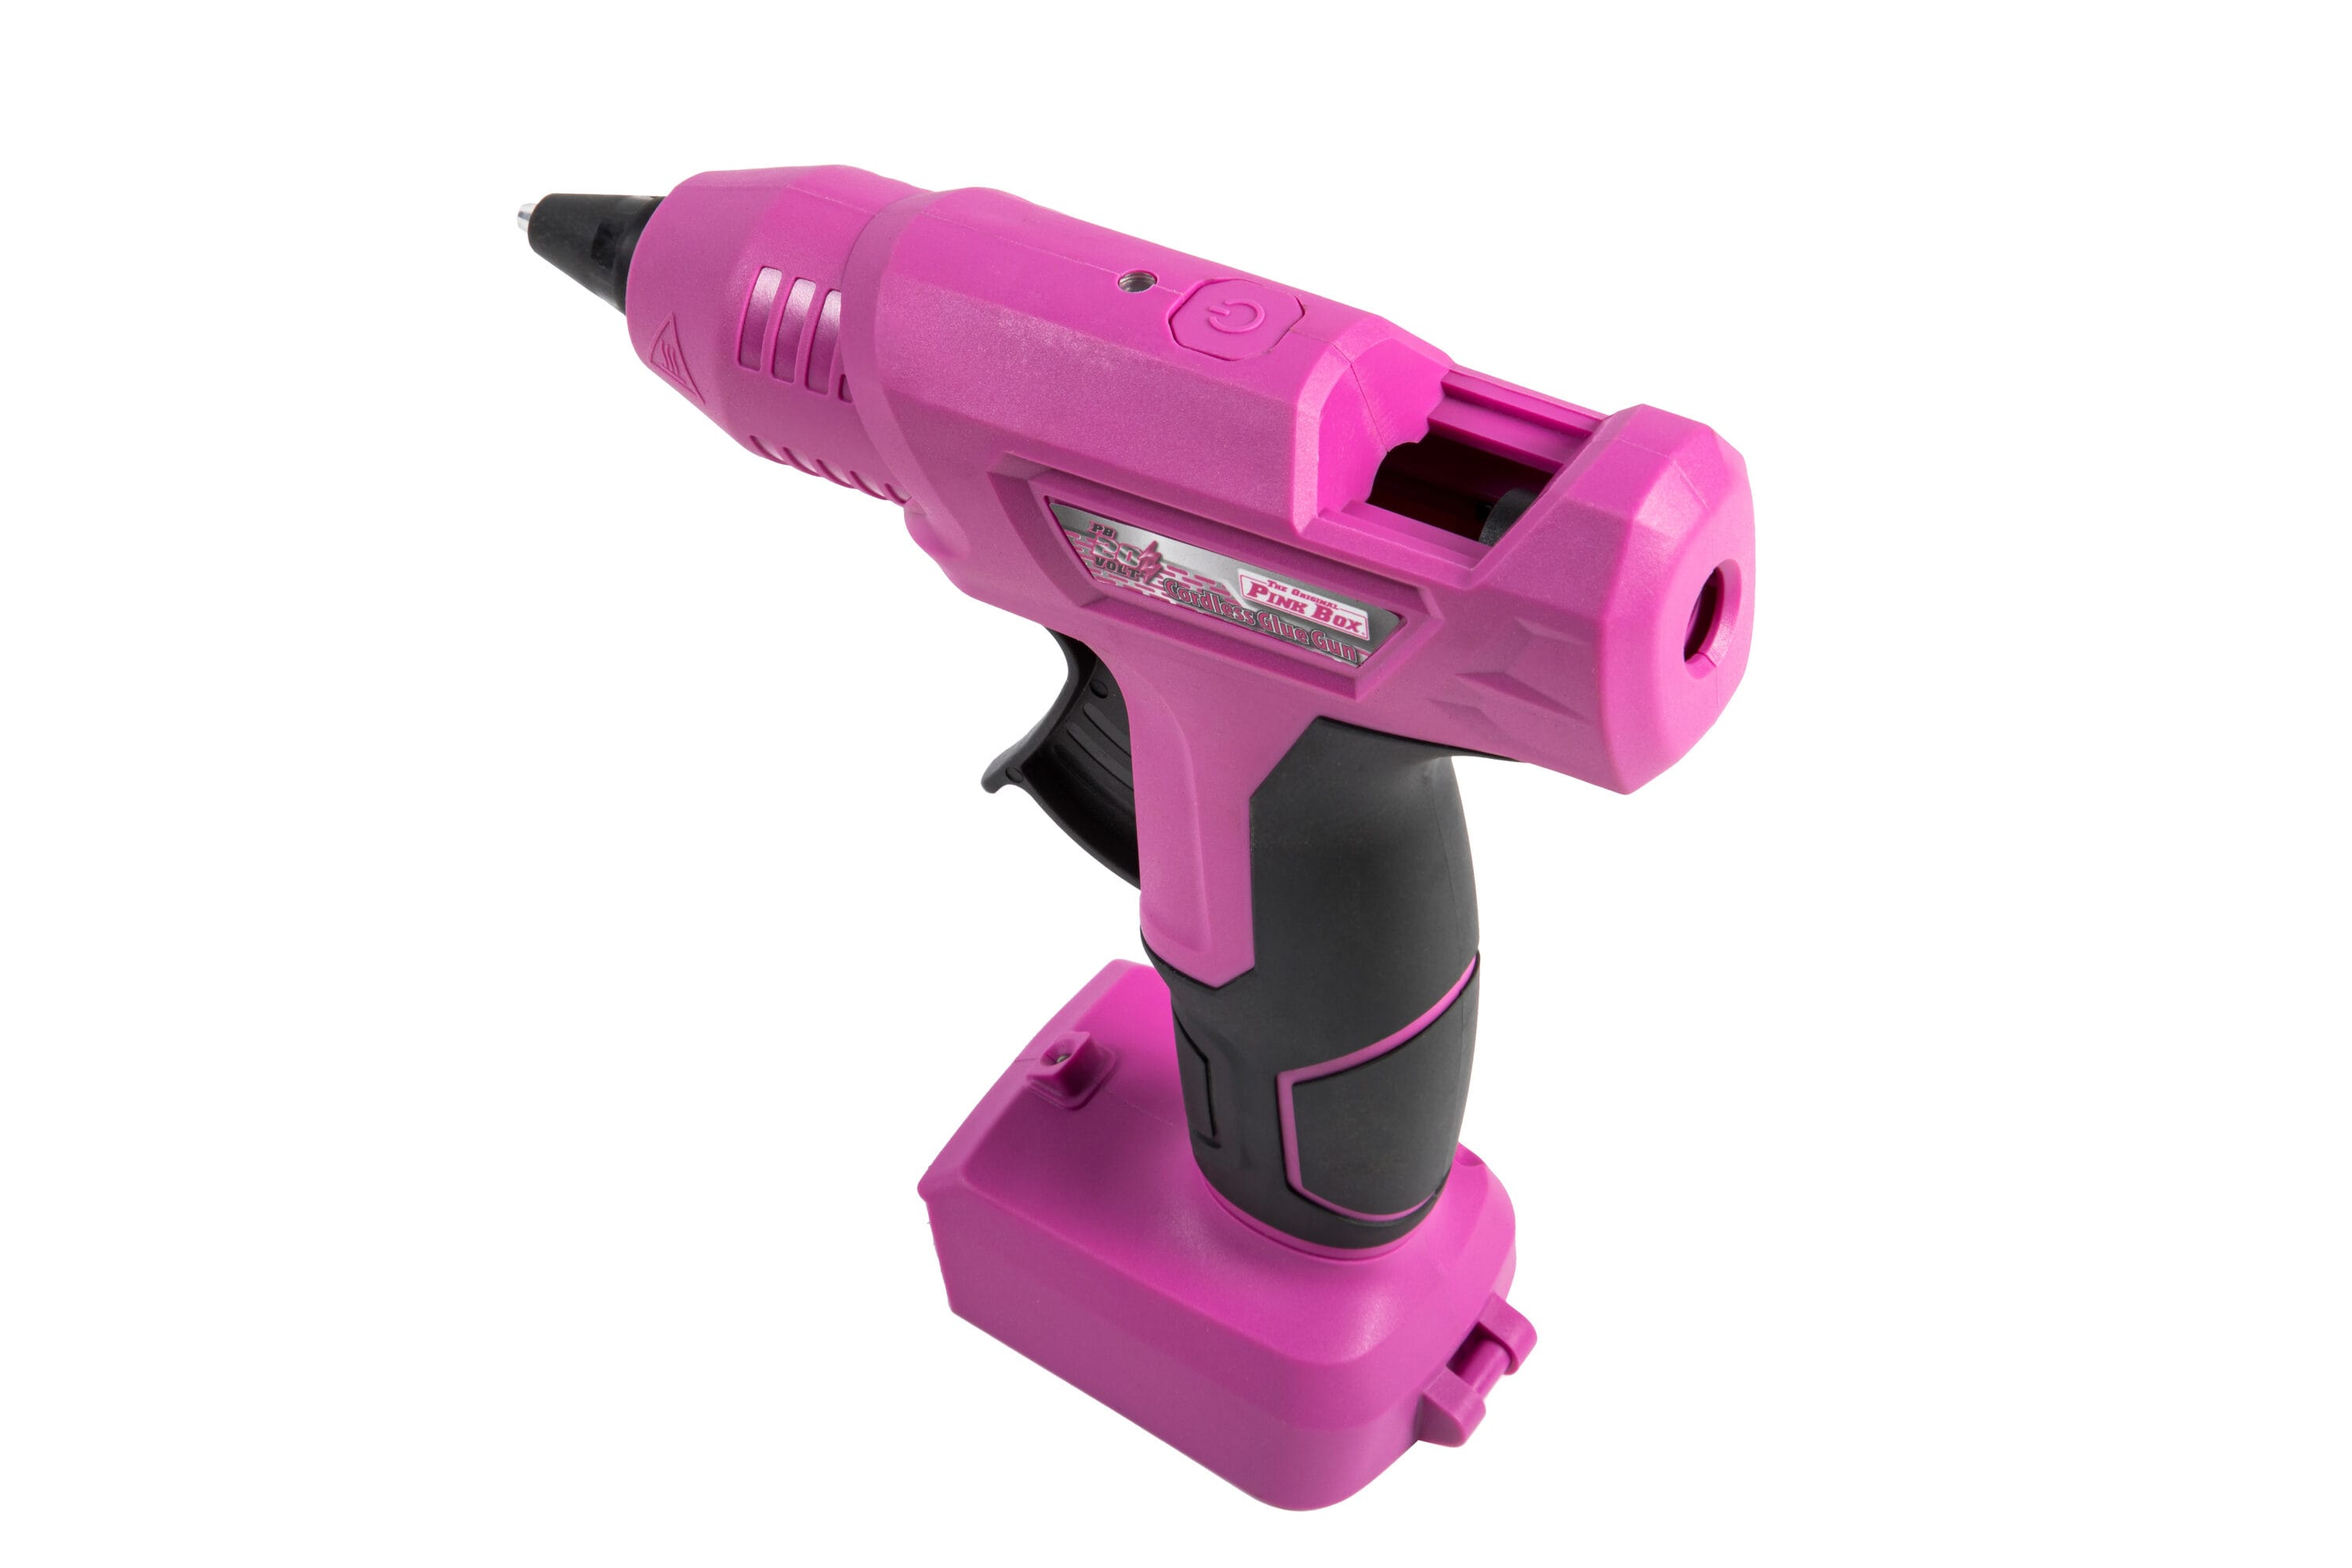 The Original Pink Box Pb20vglg_2ah_chrgr 20 Volt Lithium-Ion Cordless Glue Gun with Battery and 10 Quanity 11M Glue Sticks